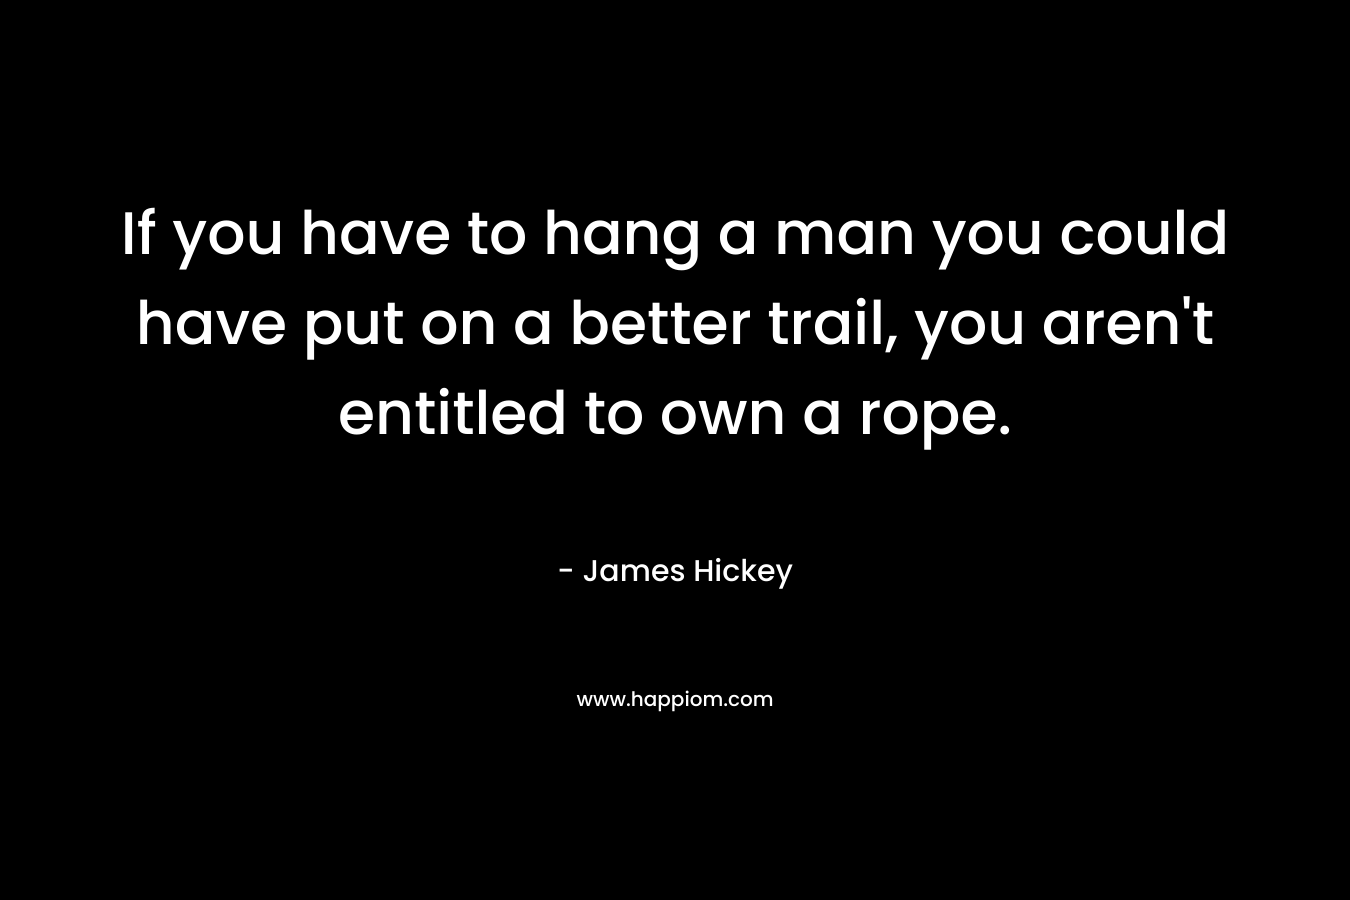 If you have to hang a man you could have put on a better trail, you aren’t entitled to own a rope. – James Hickey